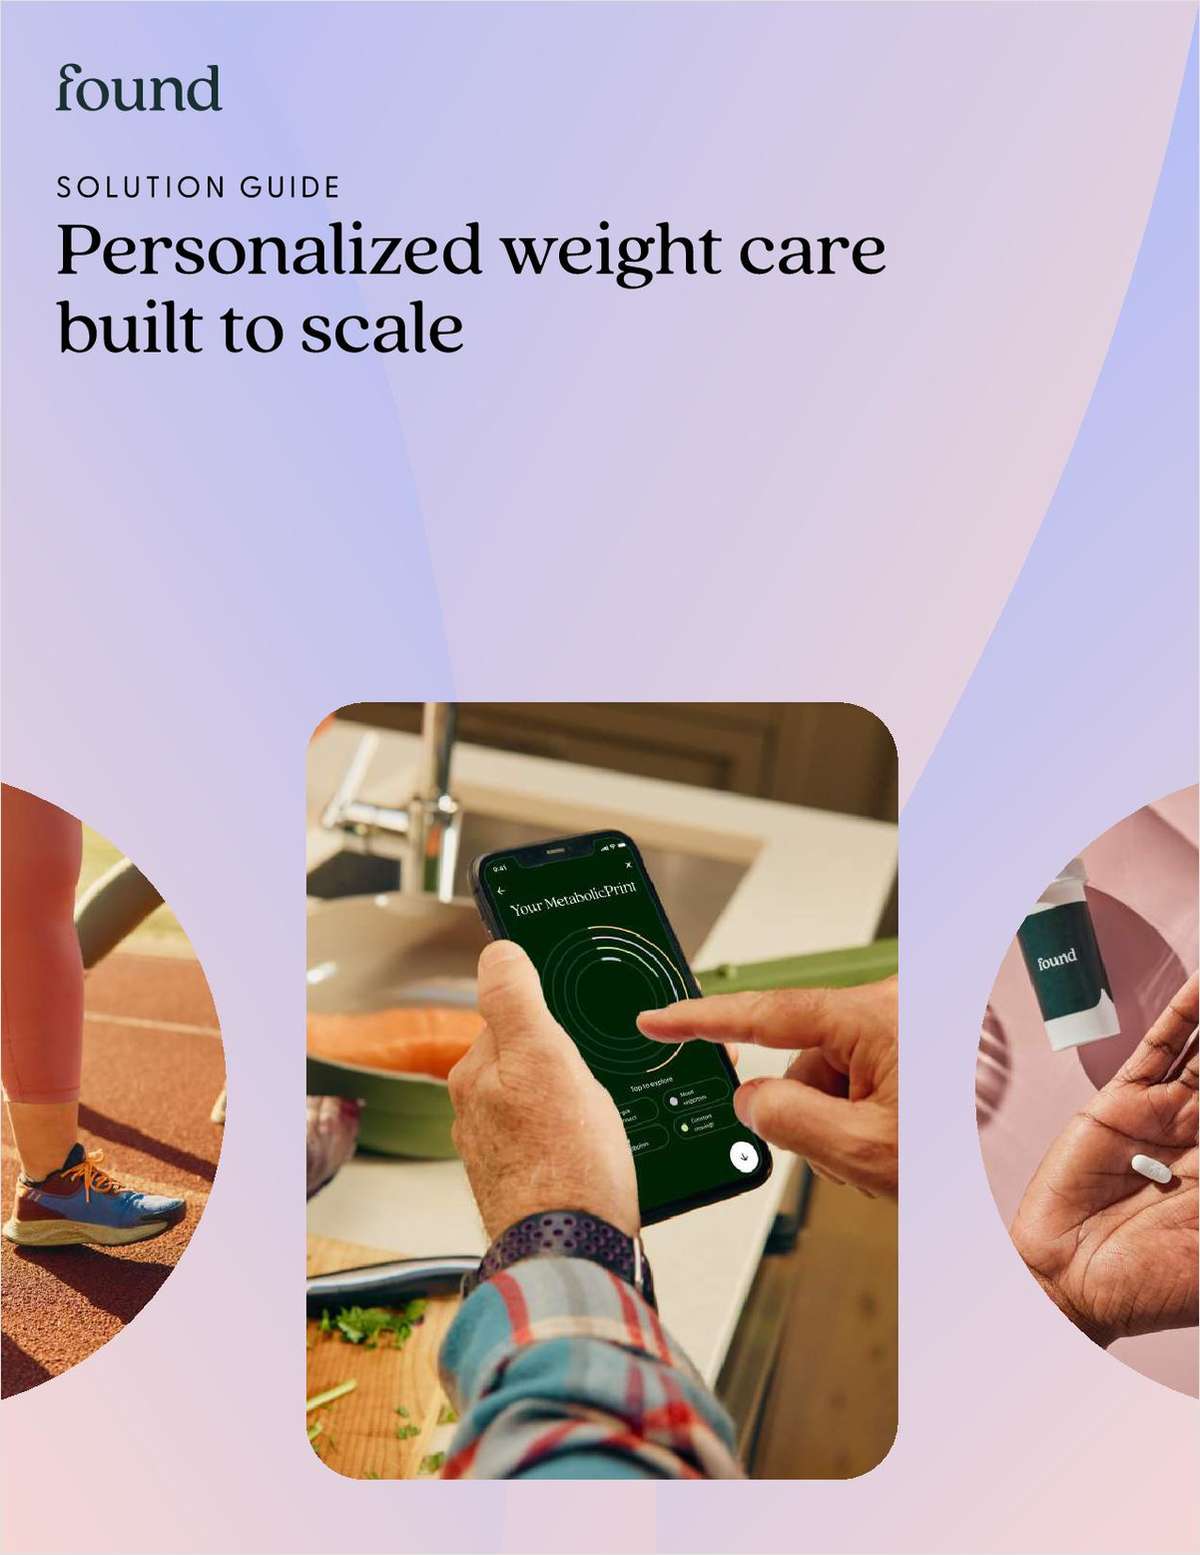 Revolutionize Your Employee Wellness with a Personalized Weight Care Program link